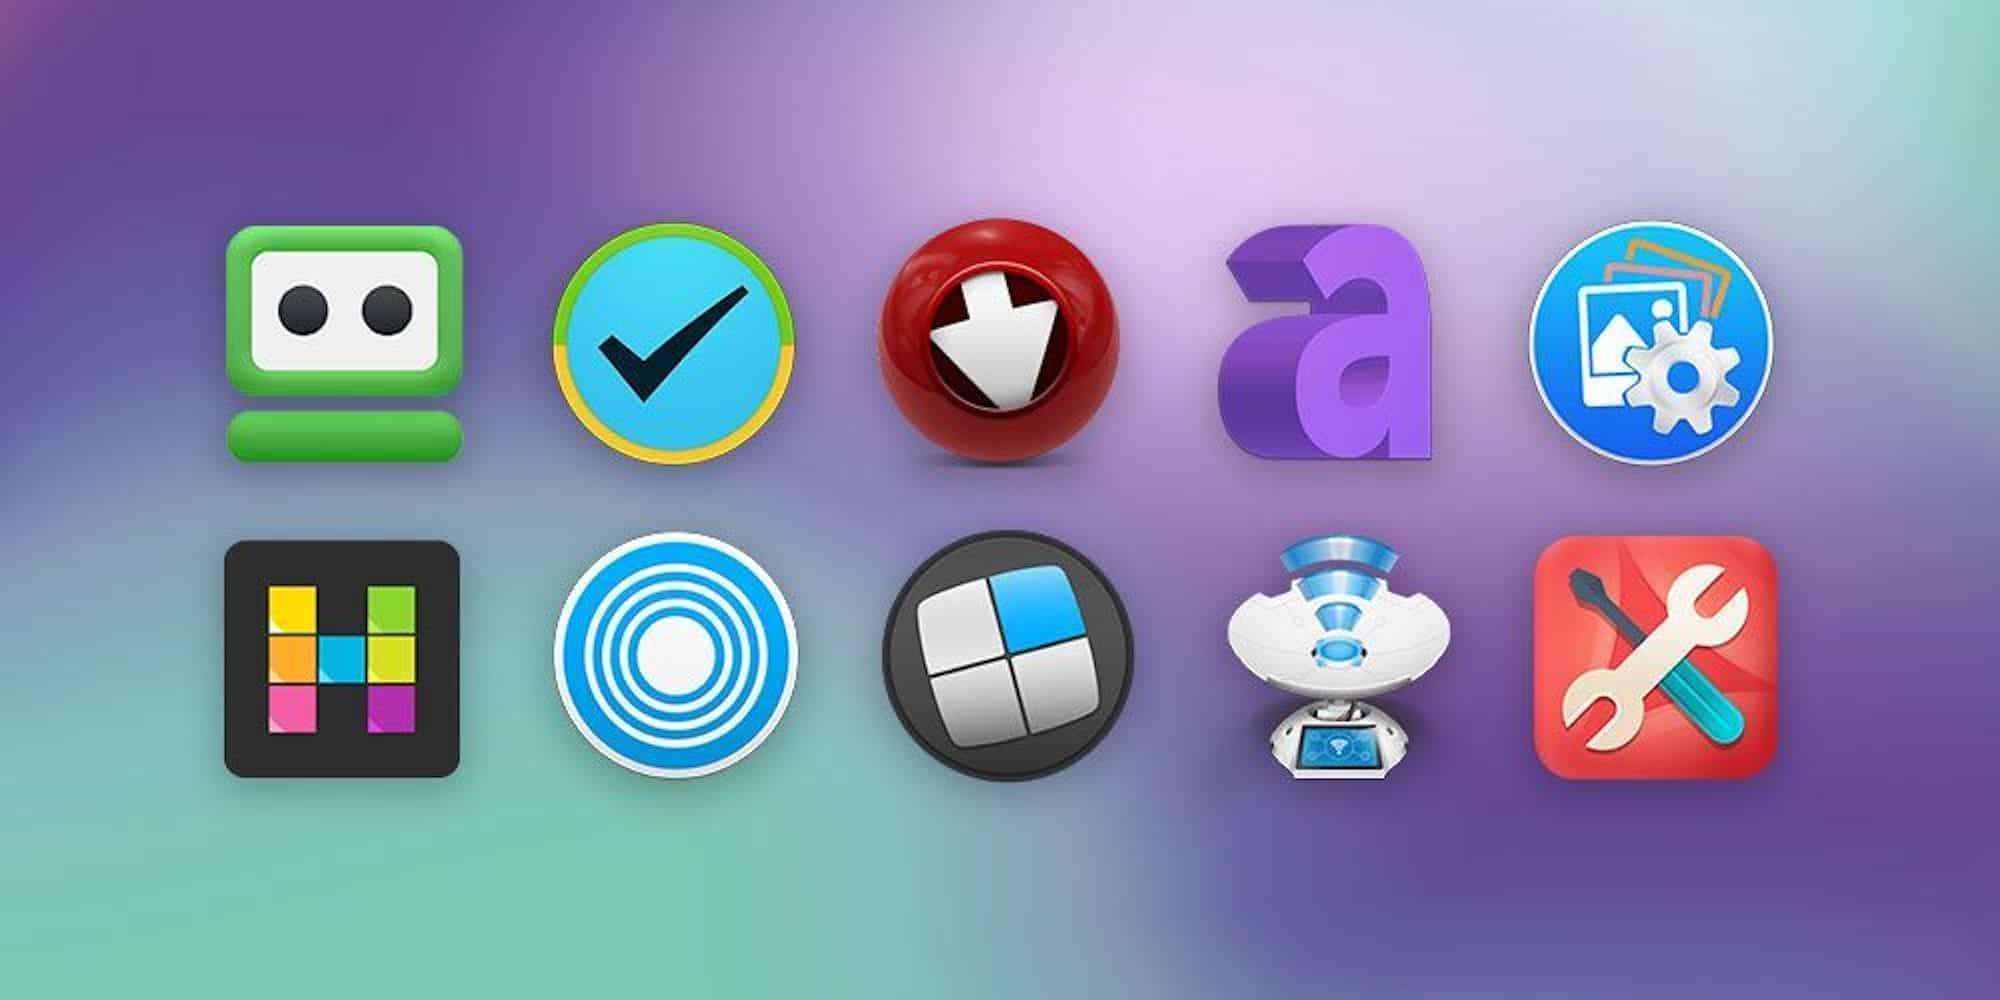 Name your price for a bundle of 10 top-shelf Mac apps.